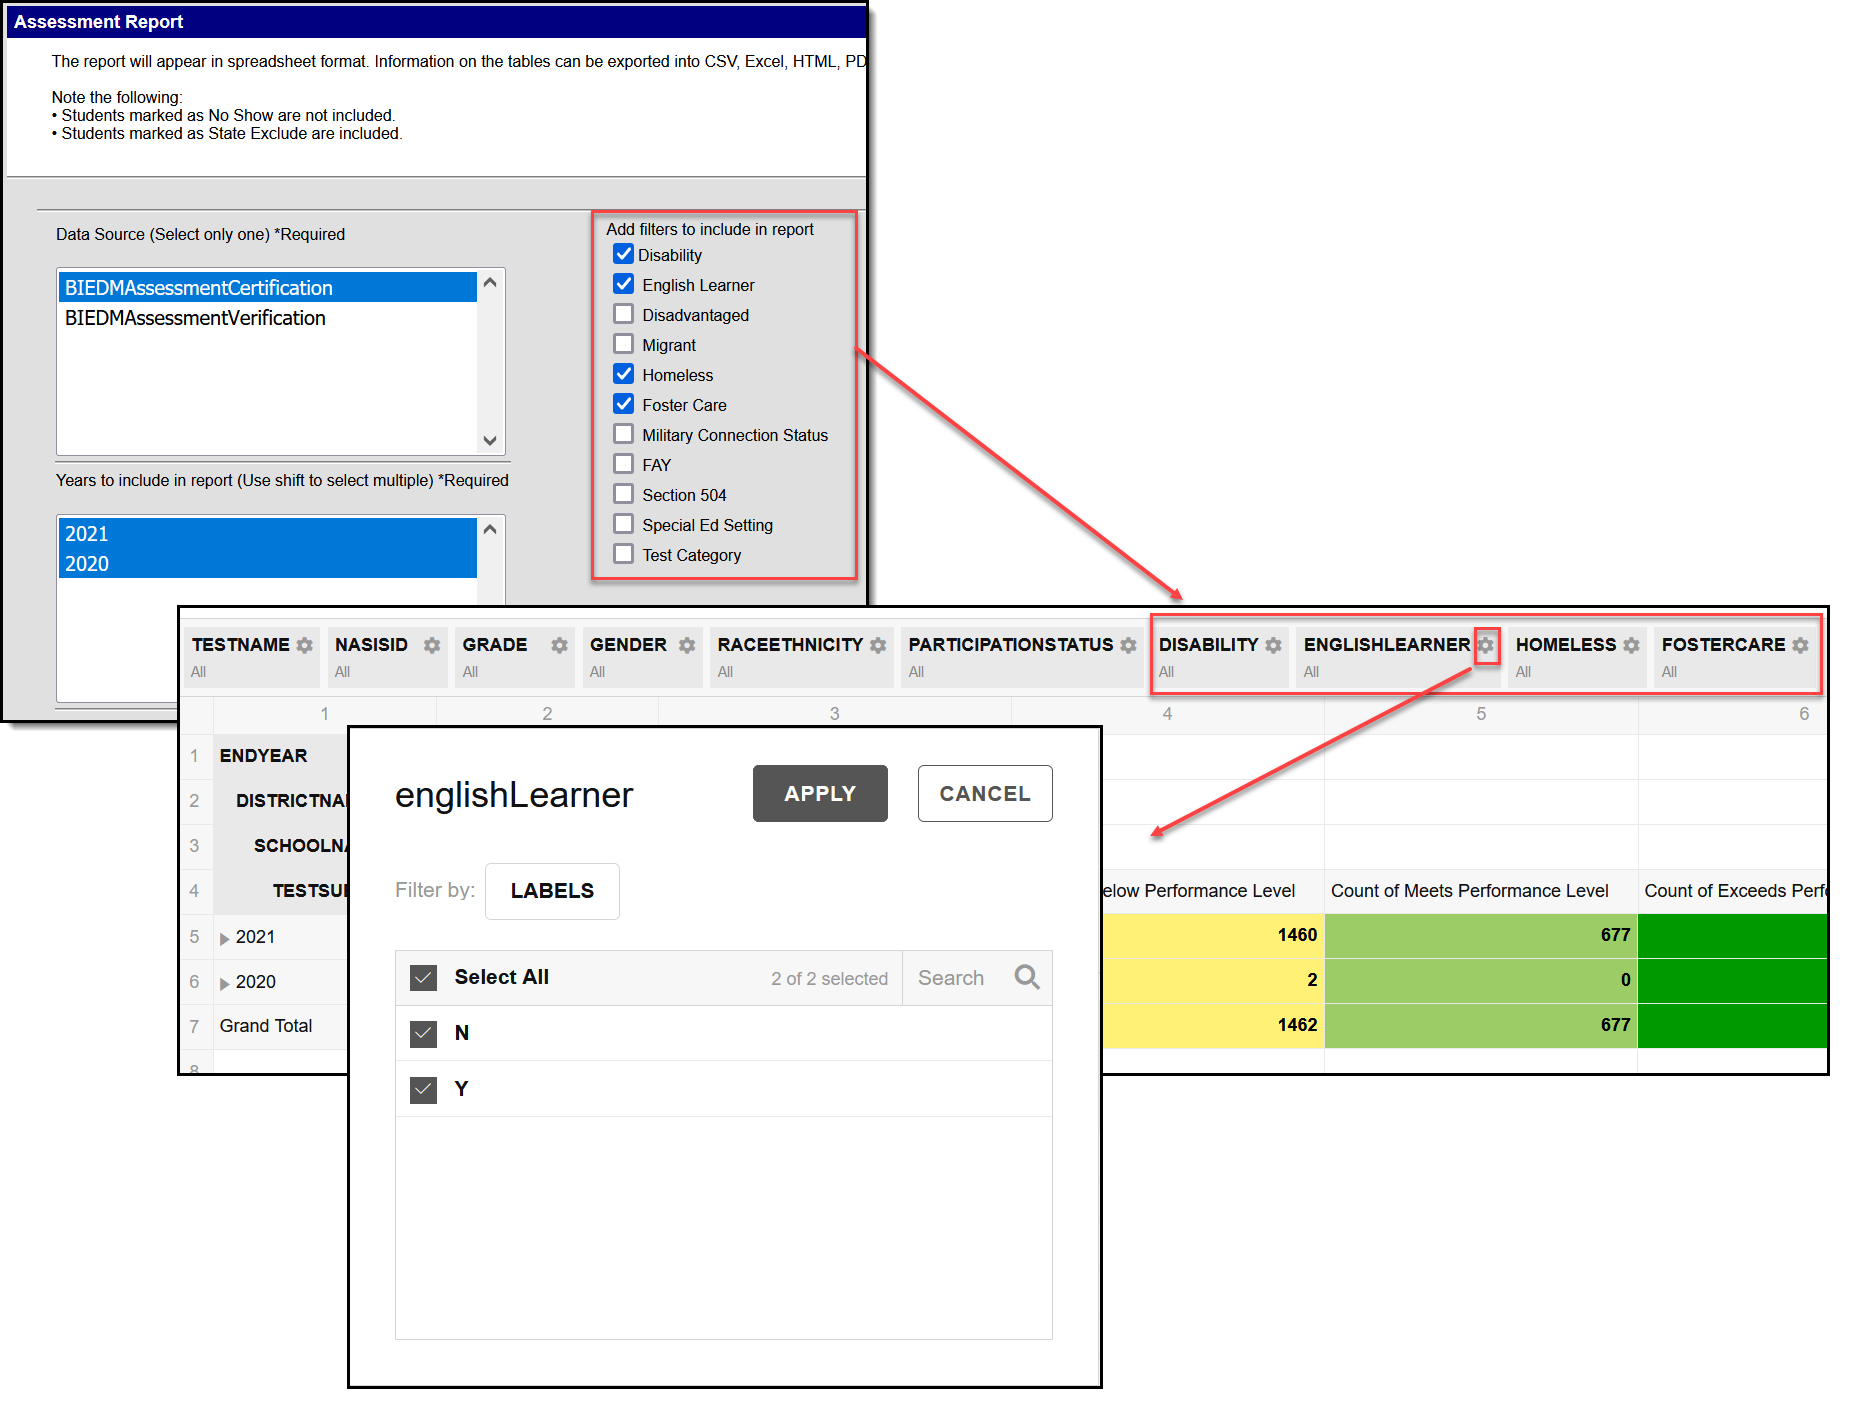 Image of the Assessment Report Editor Filters.